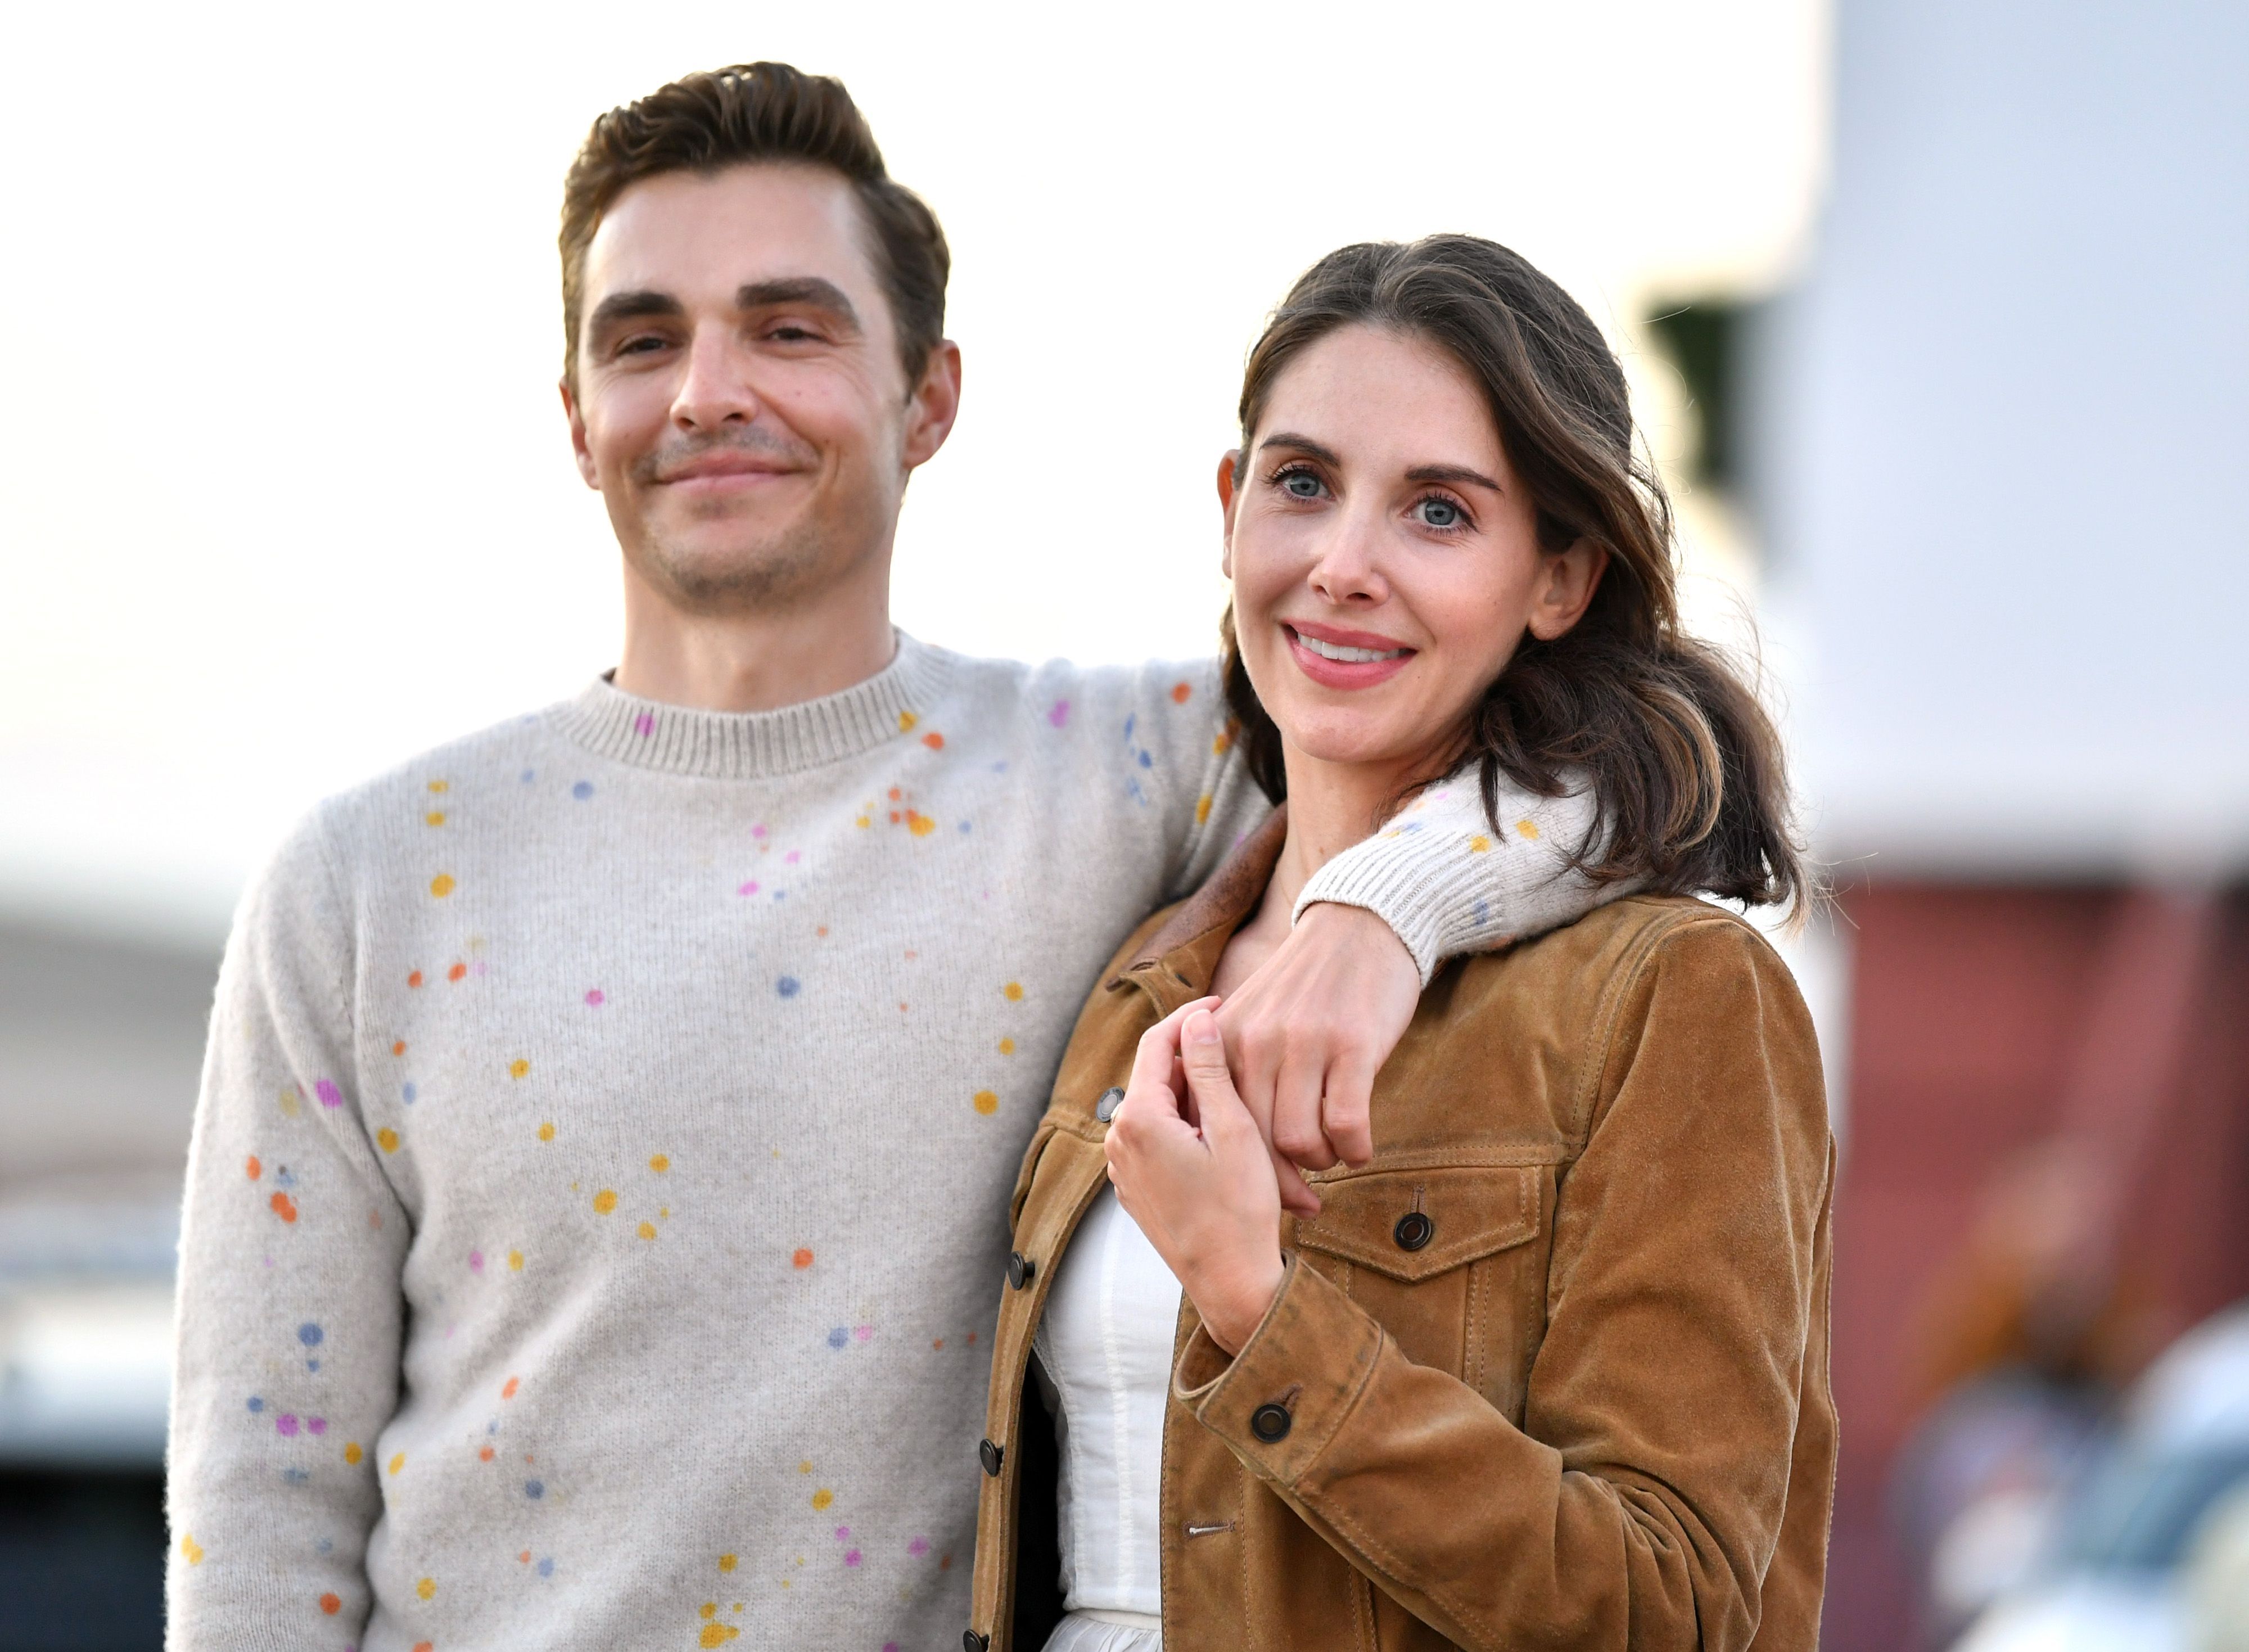 (L-R) Dave Franco and Alison Brie attend the Los Angeles advanced screening of IFC's 'The Rental' at Vineland Drive-In on June 18, 2020 in City of Industry, California.